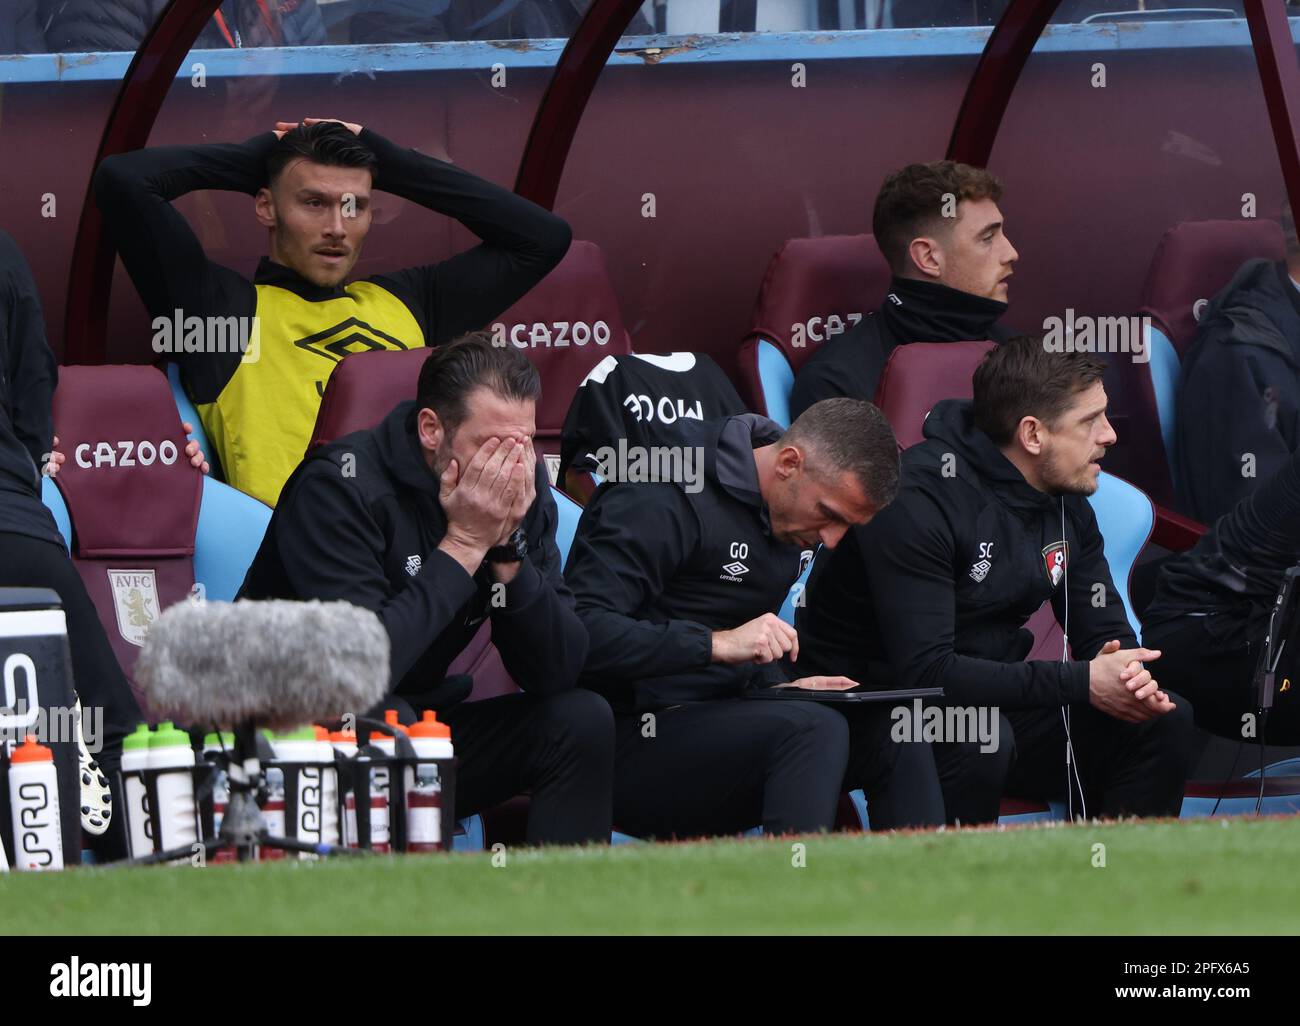 Birmingham, UK. 18th Mar, 2023. Gary O'Neill (AFC Bournemouth head coach) looks at his tablet at the Aston Villa v AFC Bournemouth EPL match, at Villa Park, Birmingham, UK on 18th March, 2023. Credit: Paul Marriott/Alamy Live News Stock Photo